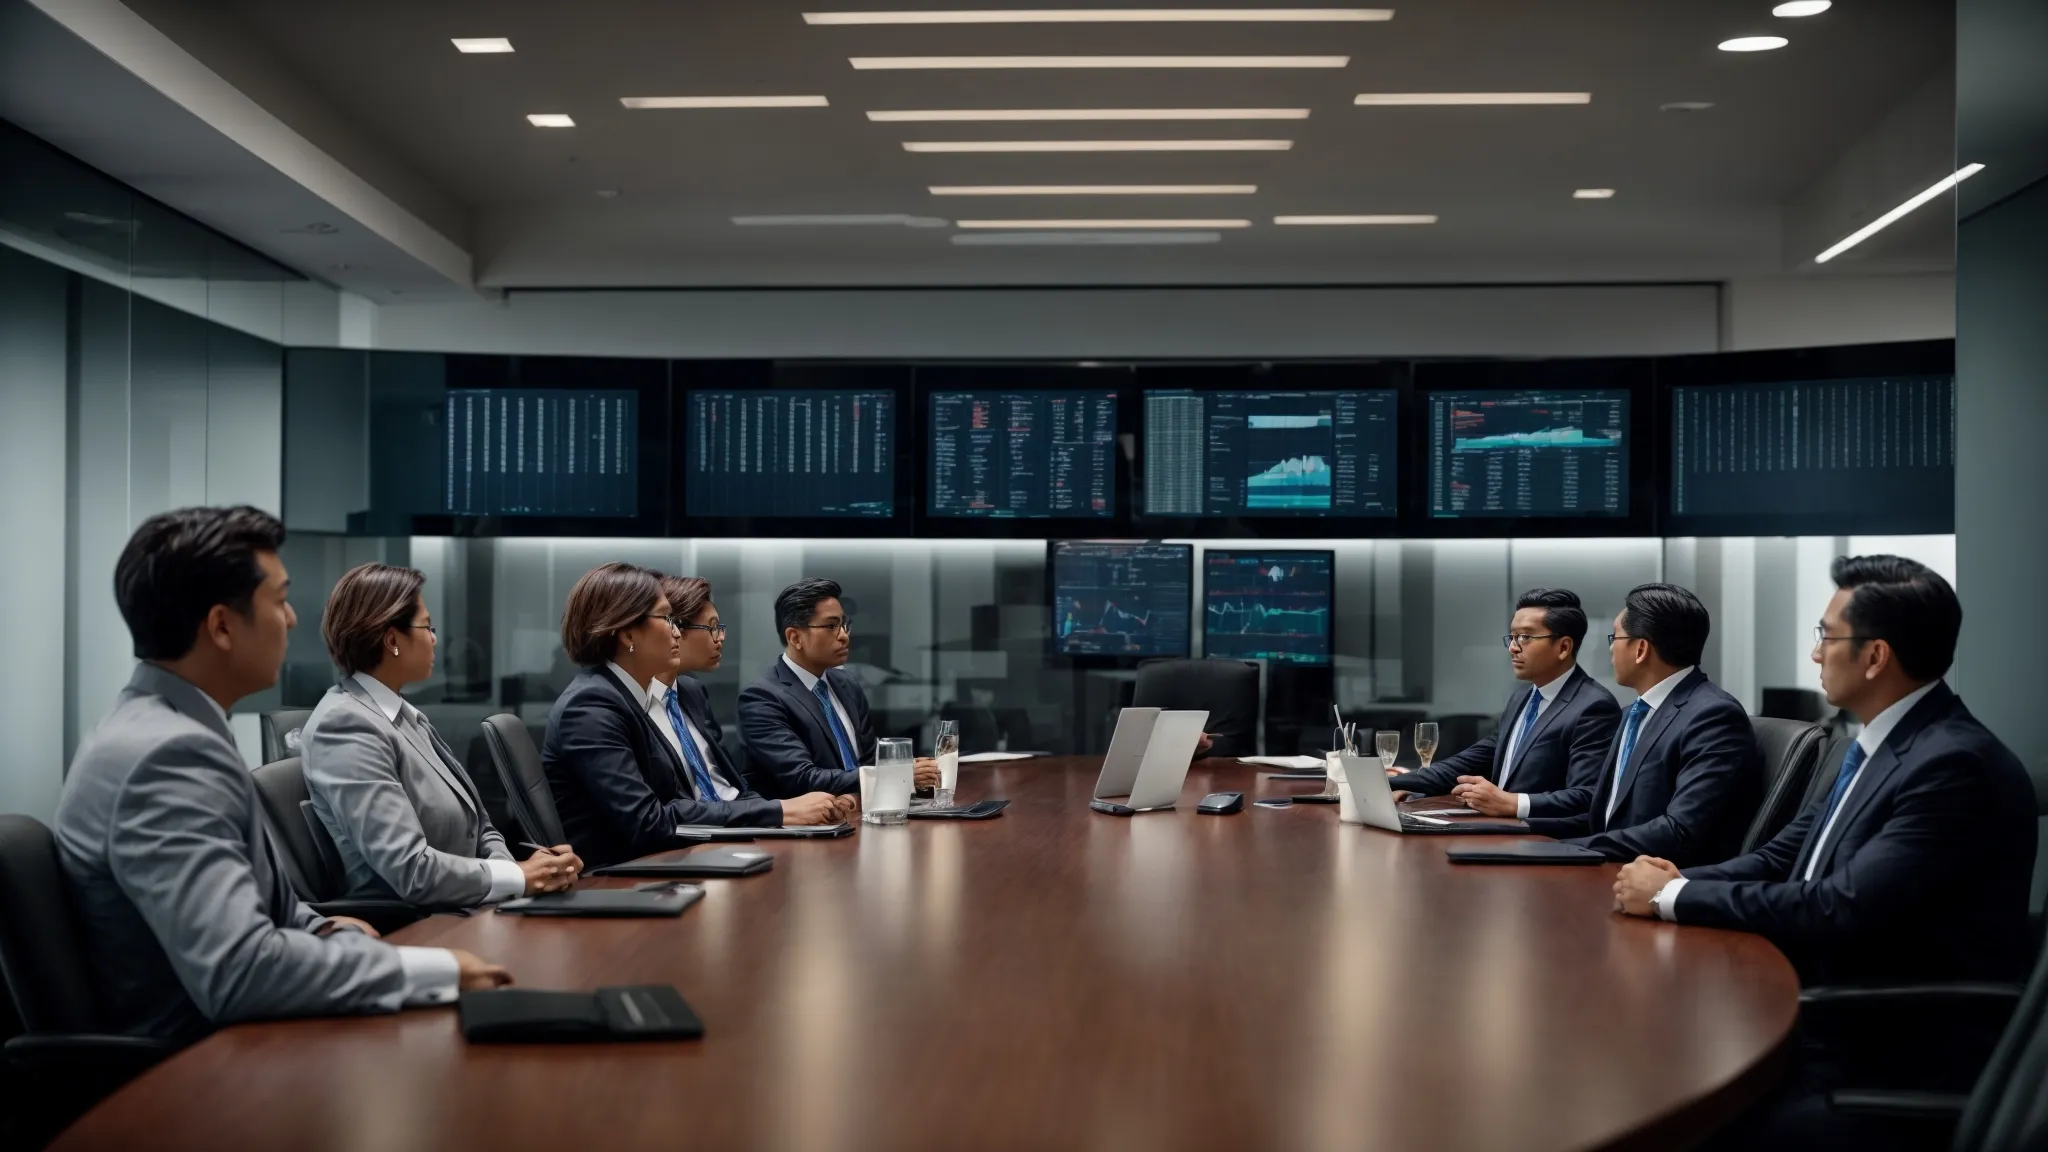 a corporate boardroom with executives analyzing data dashboards on multiple screens.